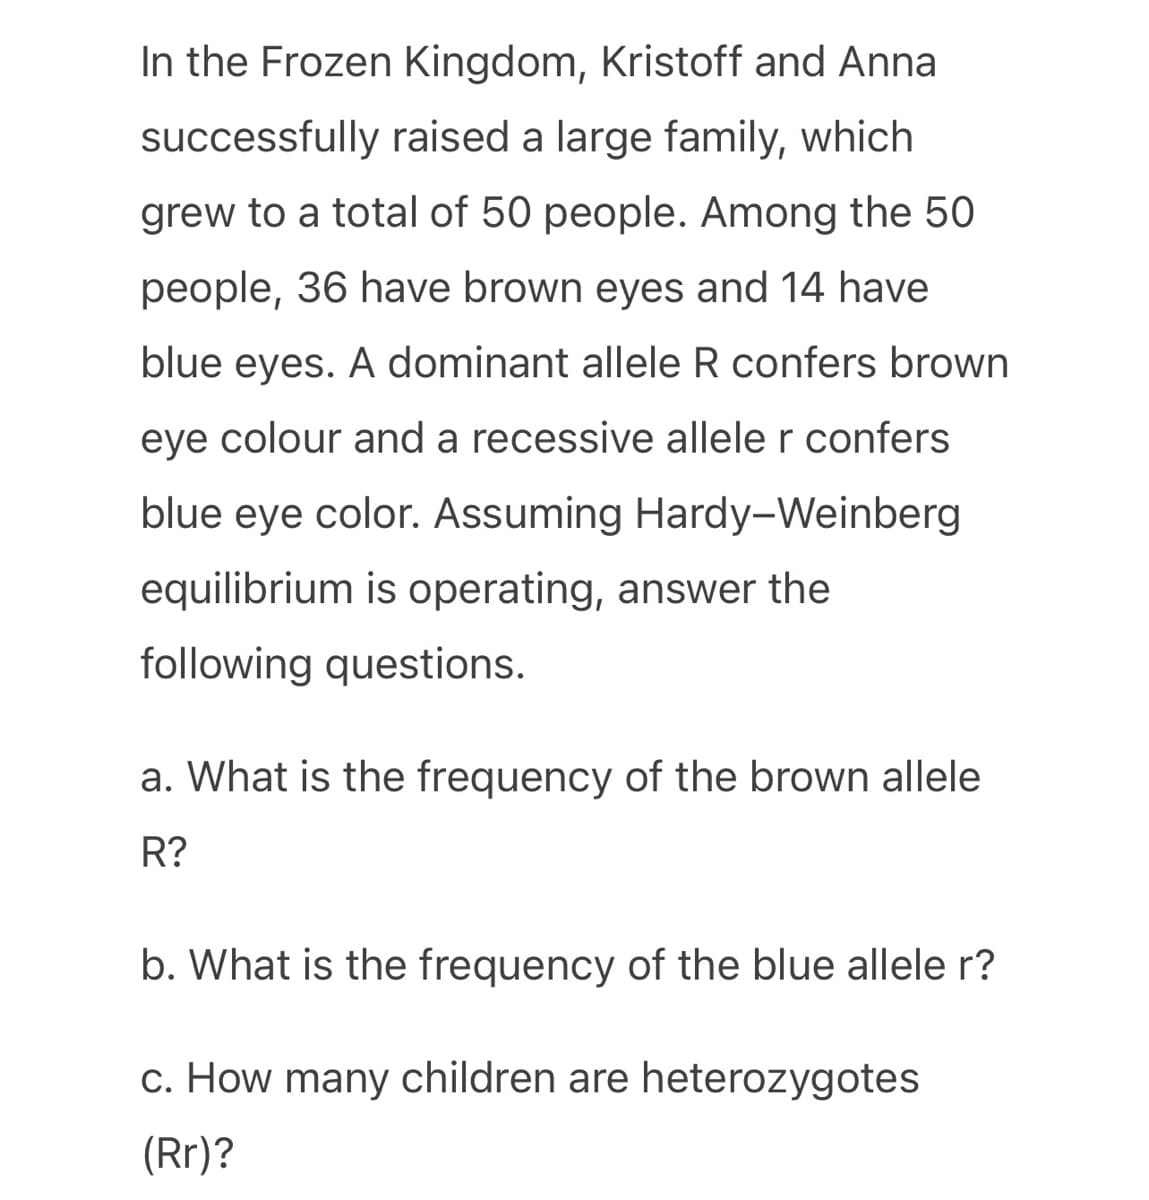 In the Frozen Kingdom, Kristoff and Anna
successfully raised a large family, which
grew to a total of 50 people. Among the 50
people, 36 have brown eyes and 14 have
blue eyes. A dominant allele R confers brown
eye colour and a recessive allele r confers
blue eye color. Assuming Hardy-Weinberg
equilibrium is operating, answer the
following questions.
a. What is the frequency of the brown allele
R?
b. What is the frequency of the blue allele r?
c. How many children are heterozygotes
(Rr)?